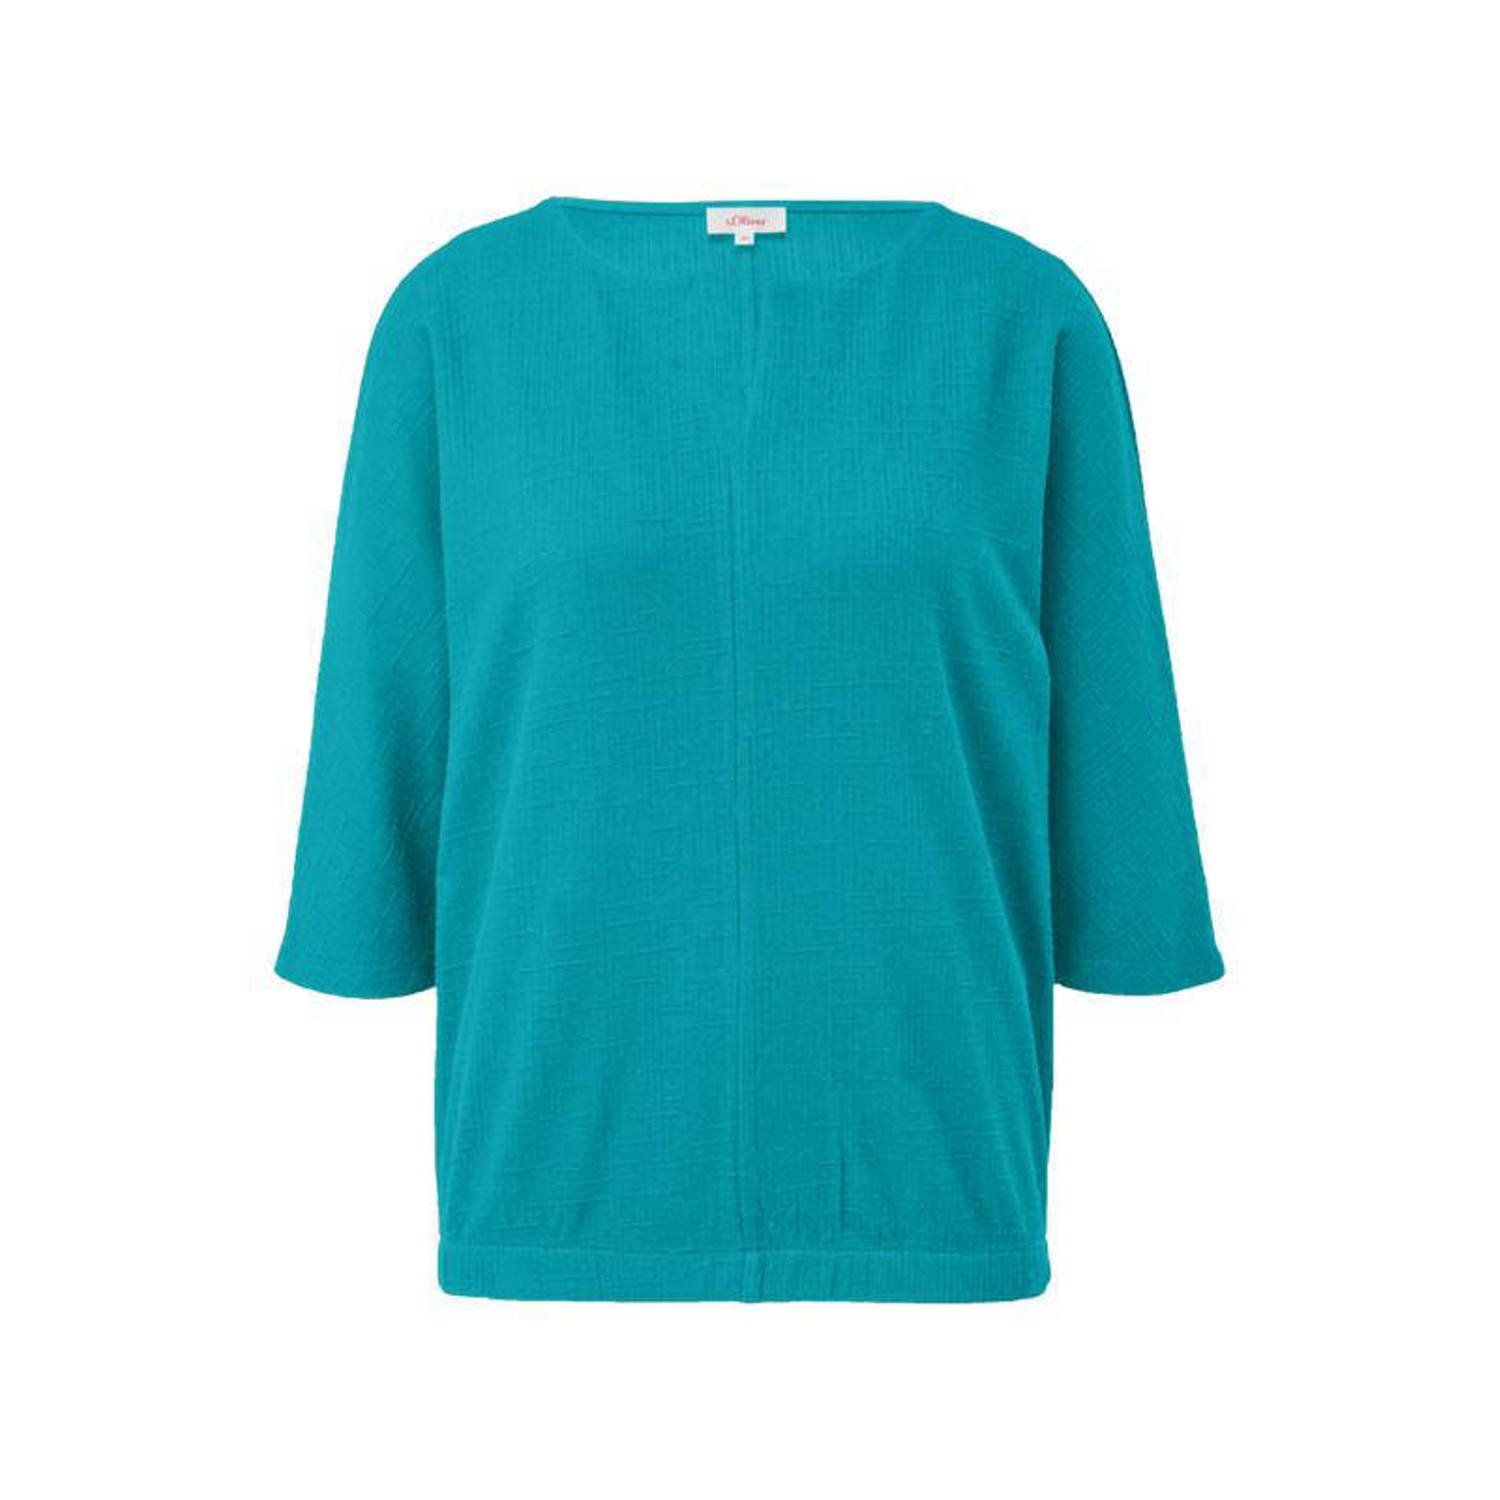 S.Oliver jersey blousetop turquoise